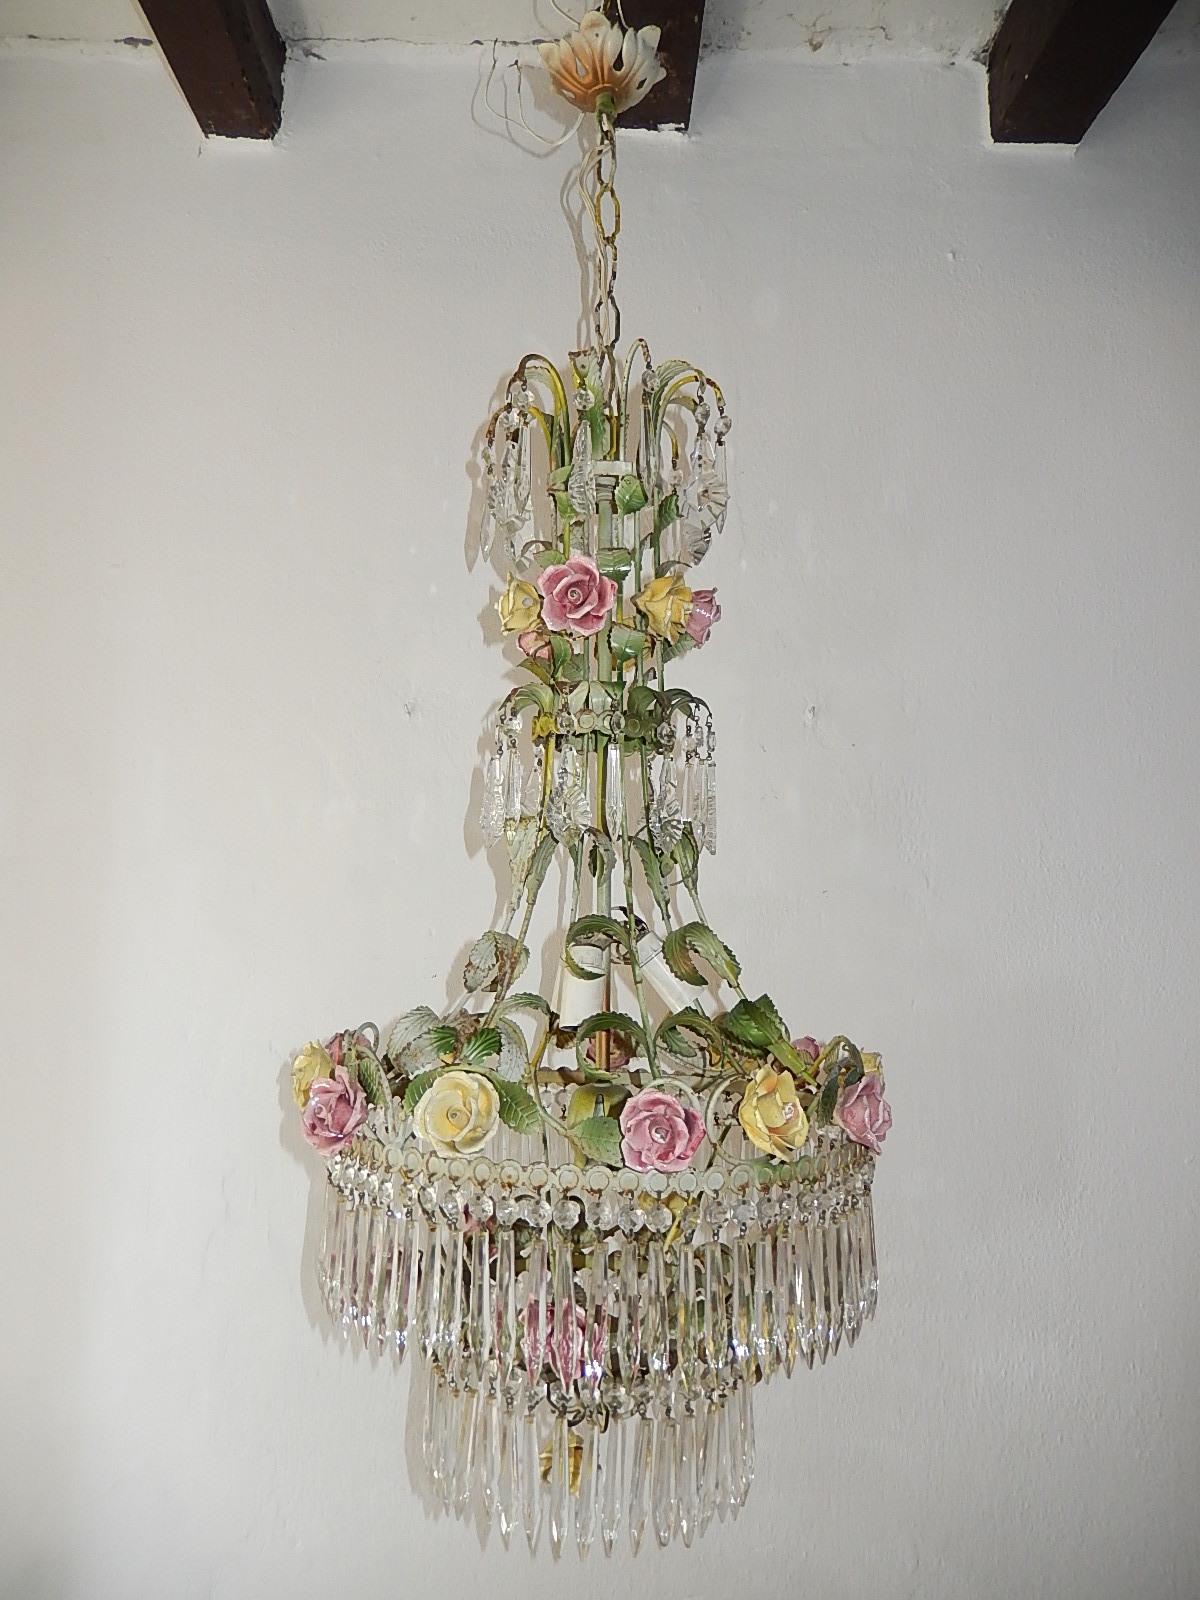 Housing four lights, will be rewired with certified UL US sockets for the USA and certified sockets for other countries and ready to hang. Green tole leaves galore. Original color tole. Four tiers of vintage crystal prisms, in spear shape. Also